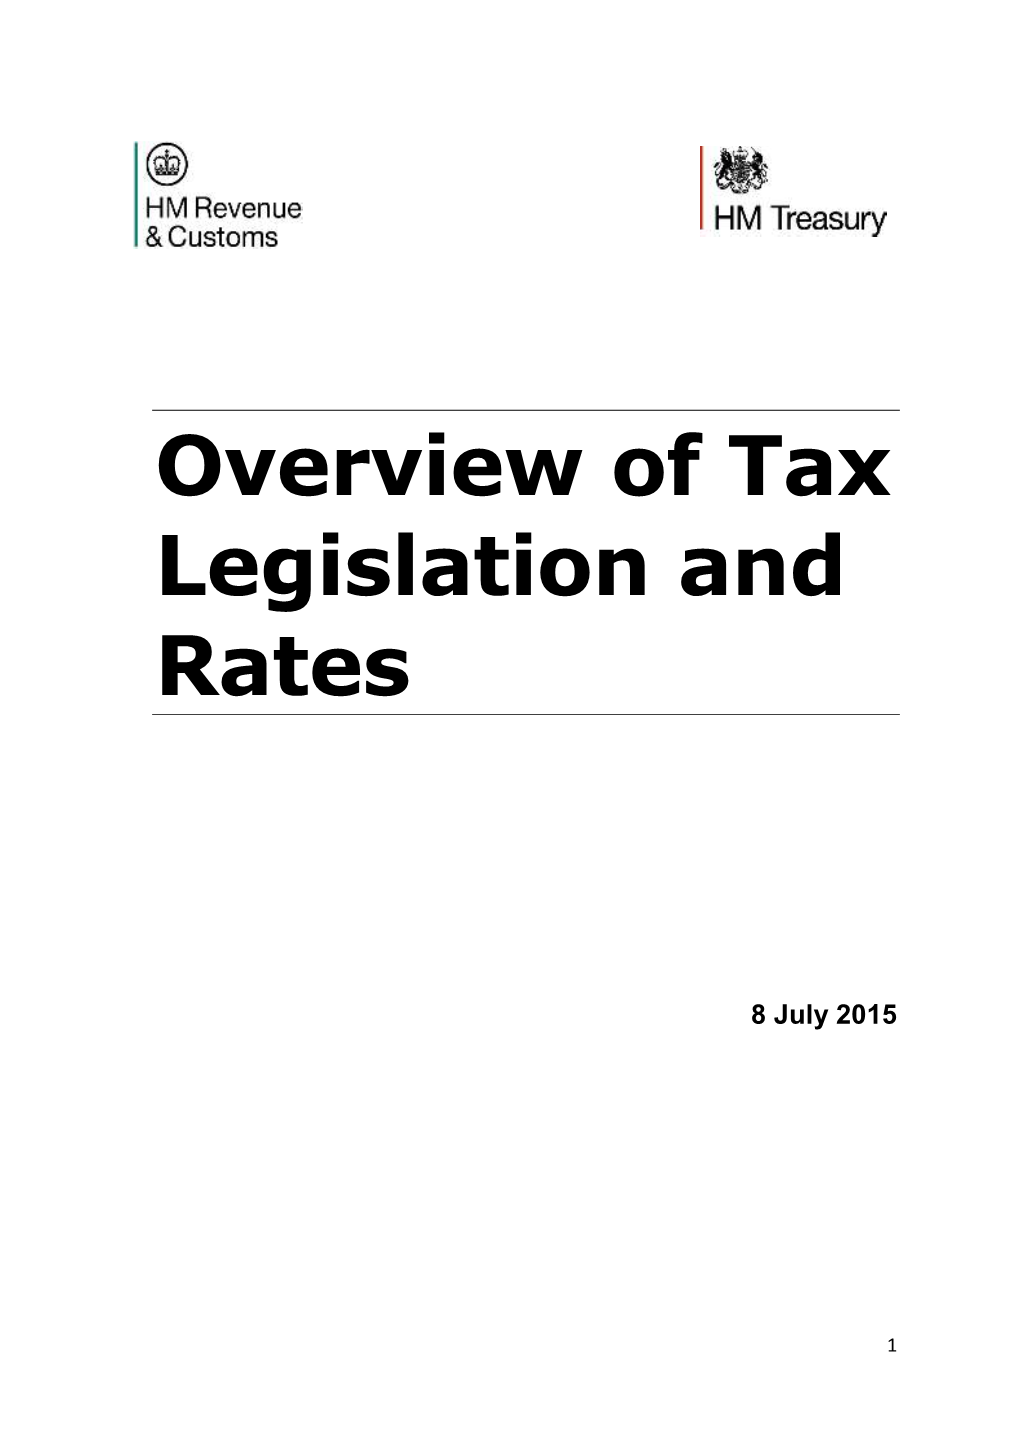 Overview of Tax Legislation and Rates